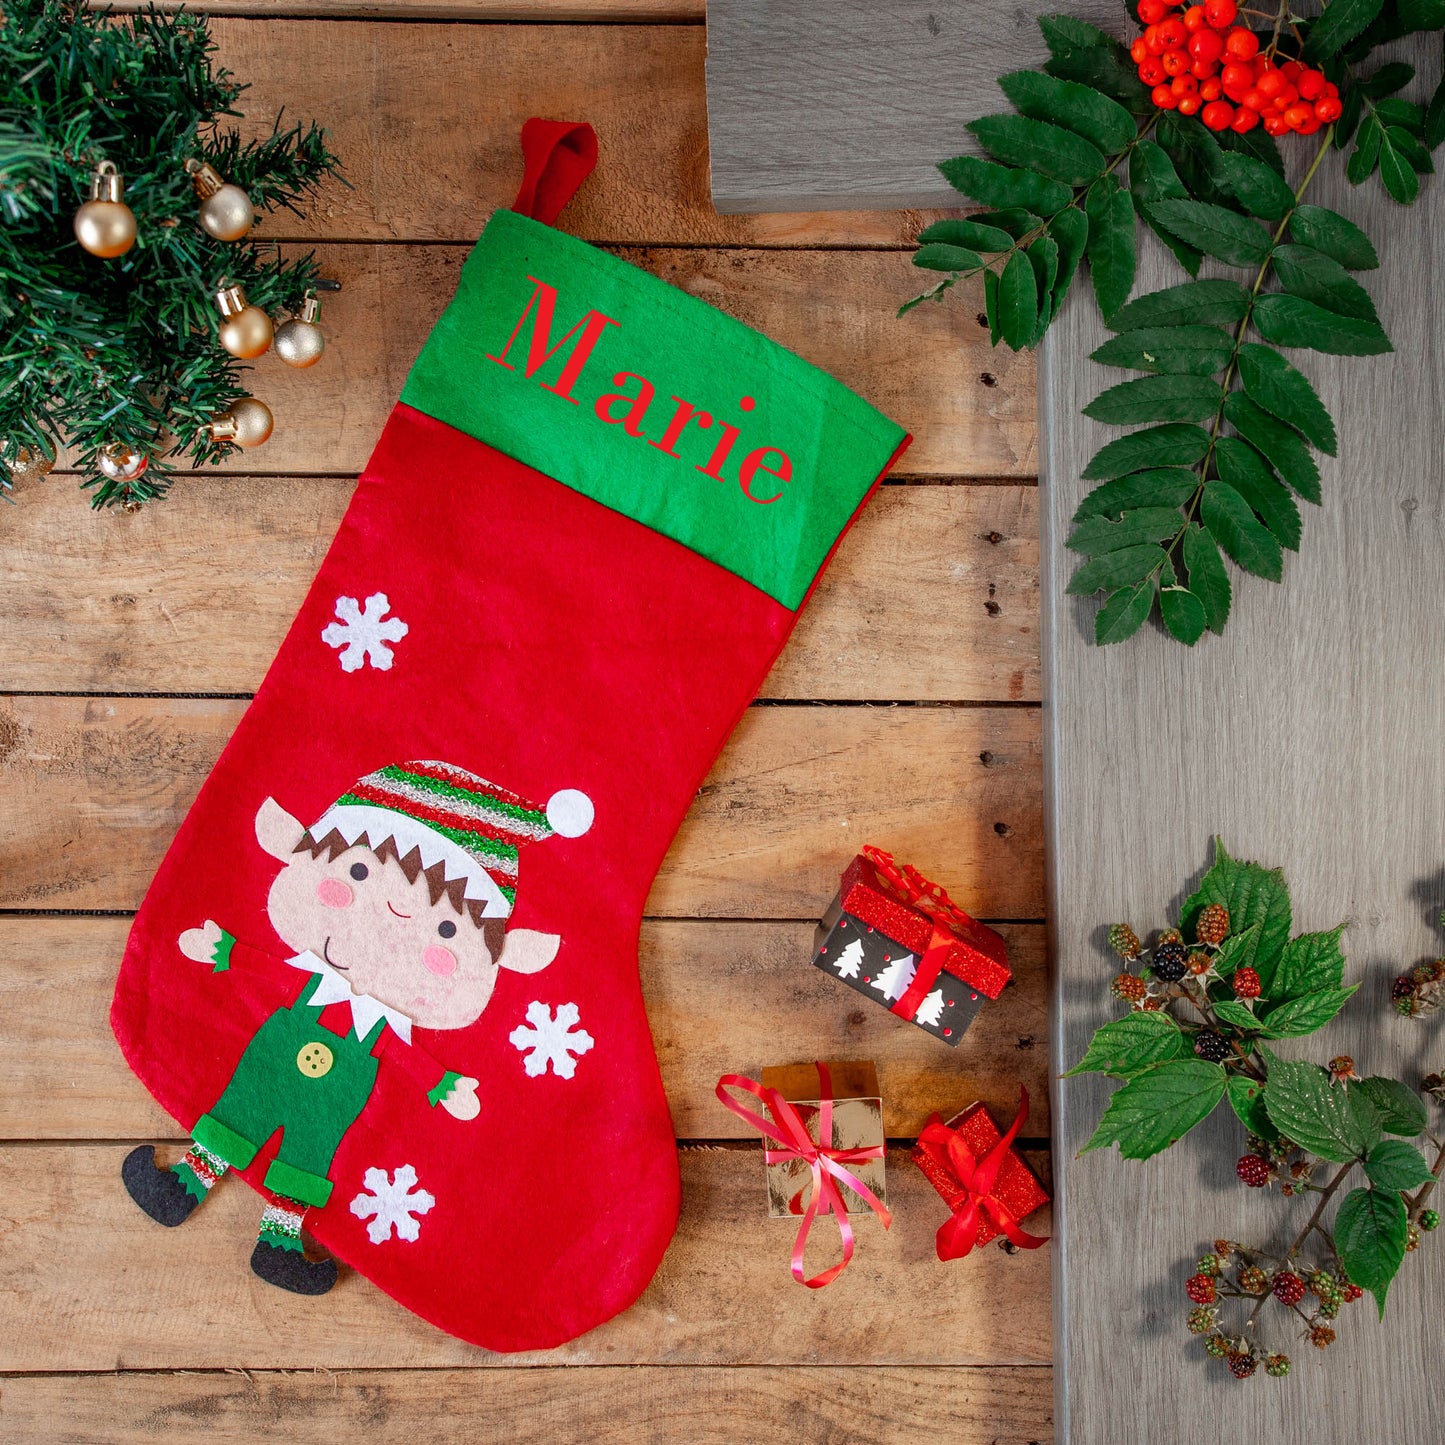 Embroidered Personalised Christmas Stocking With Santa Or Elf Design  - Always Looking Good -   